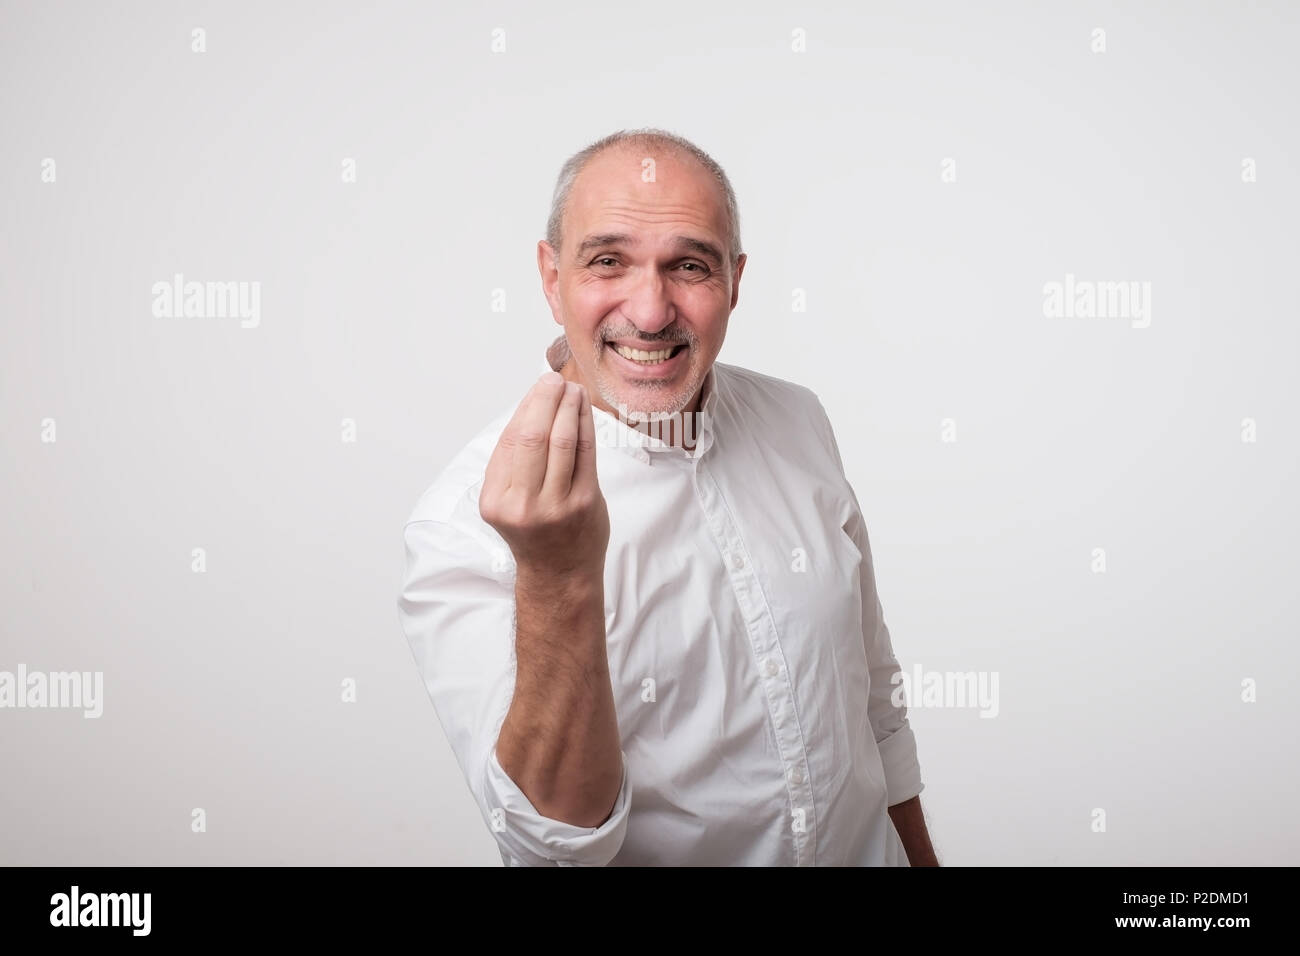 Bald handsome mature man looking angry showing italian gesture over white background. Stock Photo